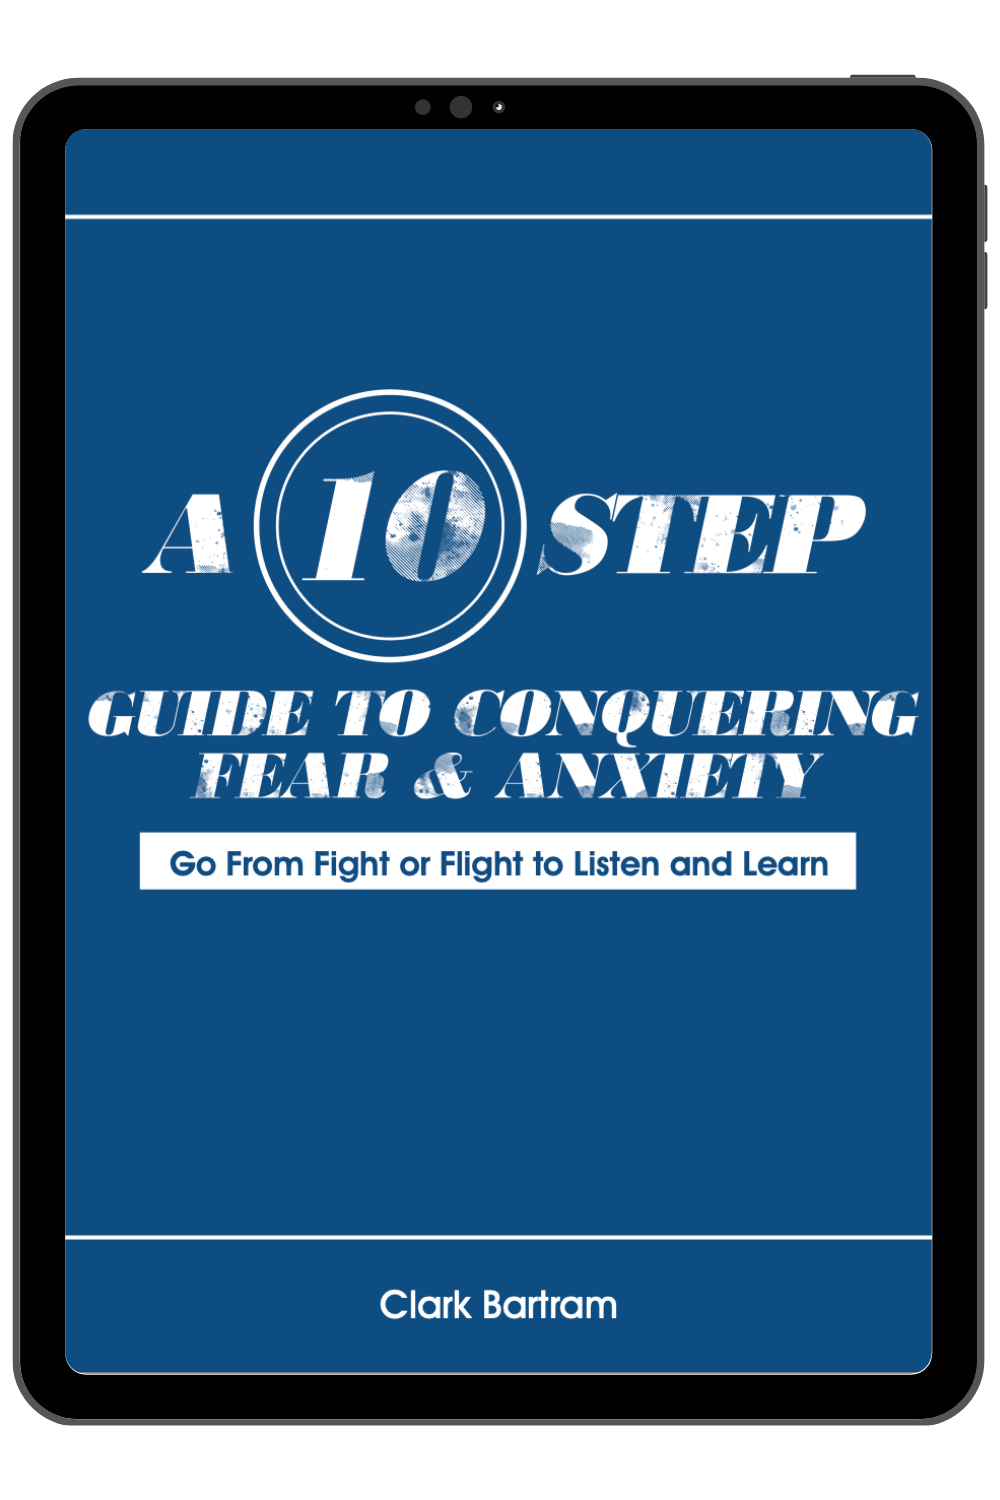 A 10 Step Guide To Conquering Fear & Anxiety - eBook by Clark Bartram